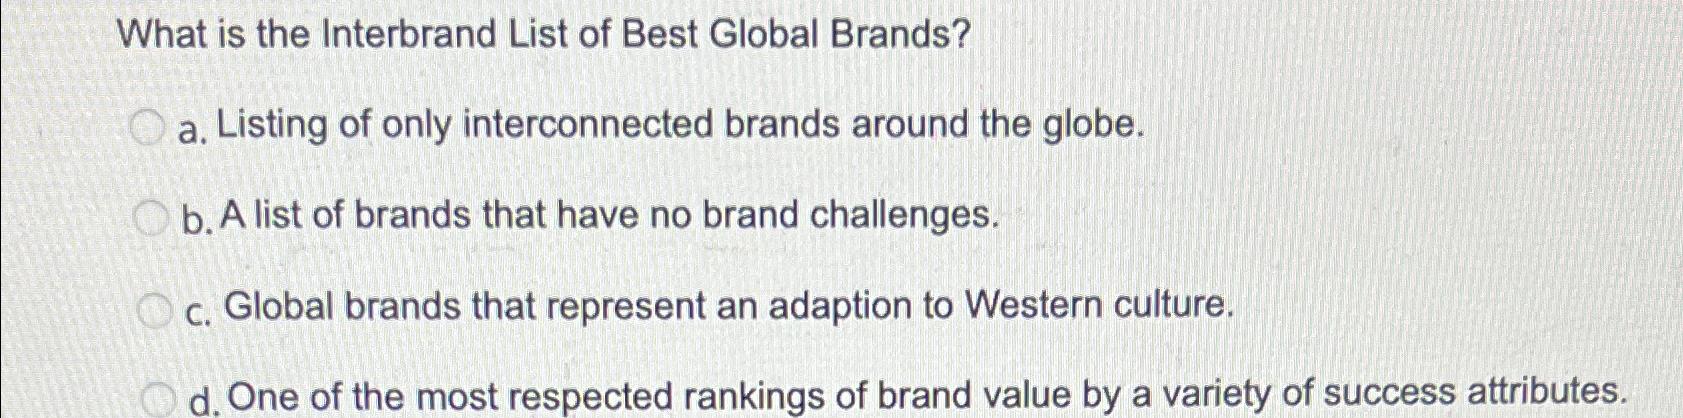 What is the Interbrand List of Best Global Brands? Oa. Listing of only interconnected brands around the